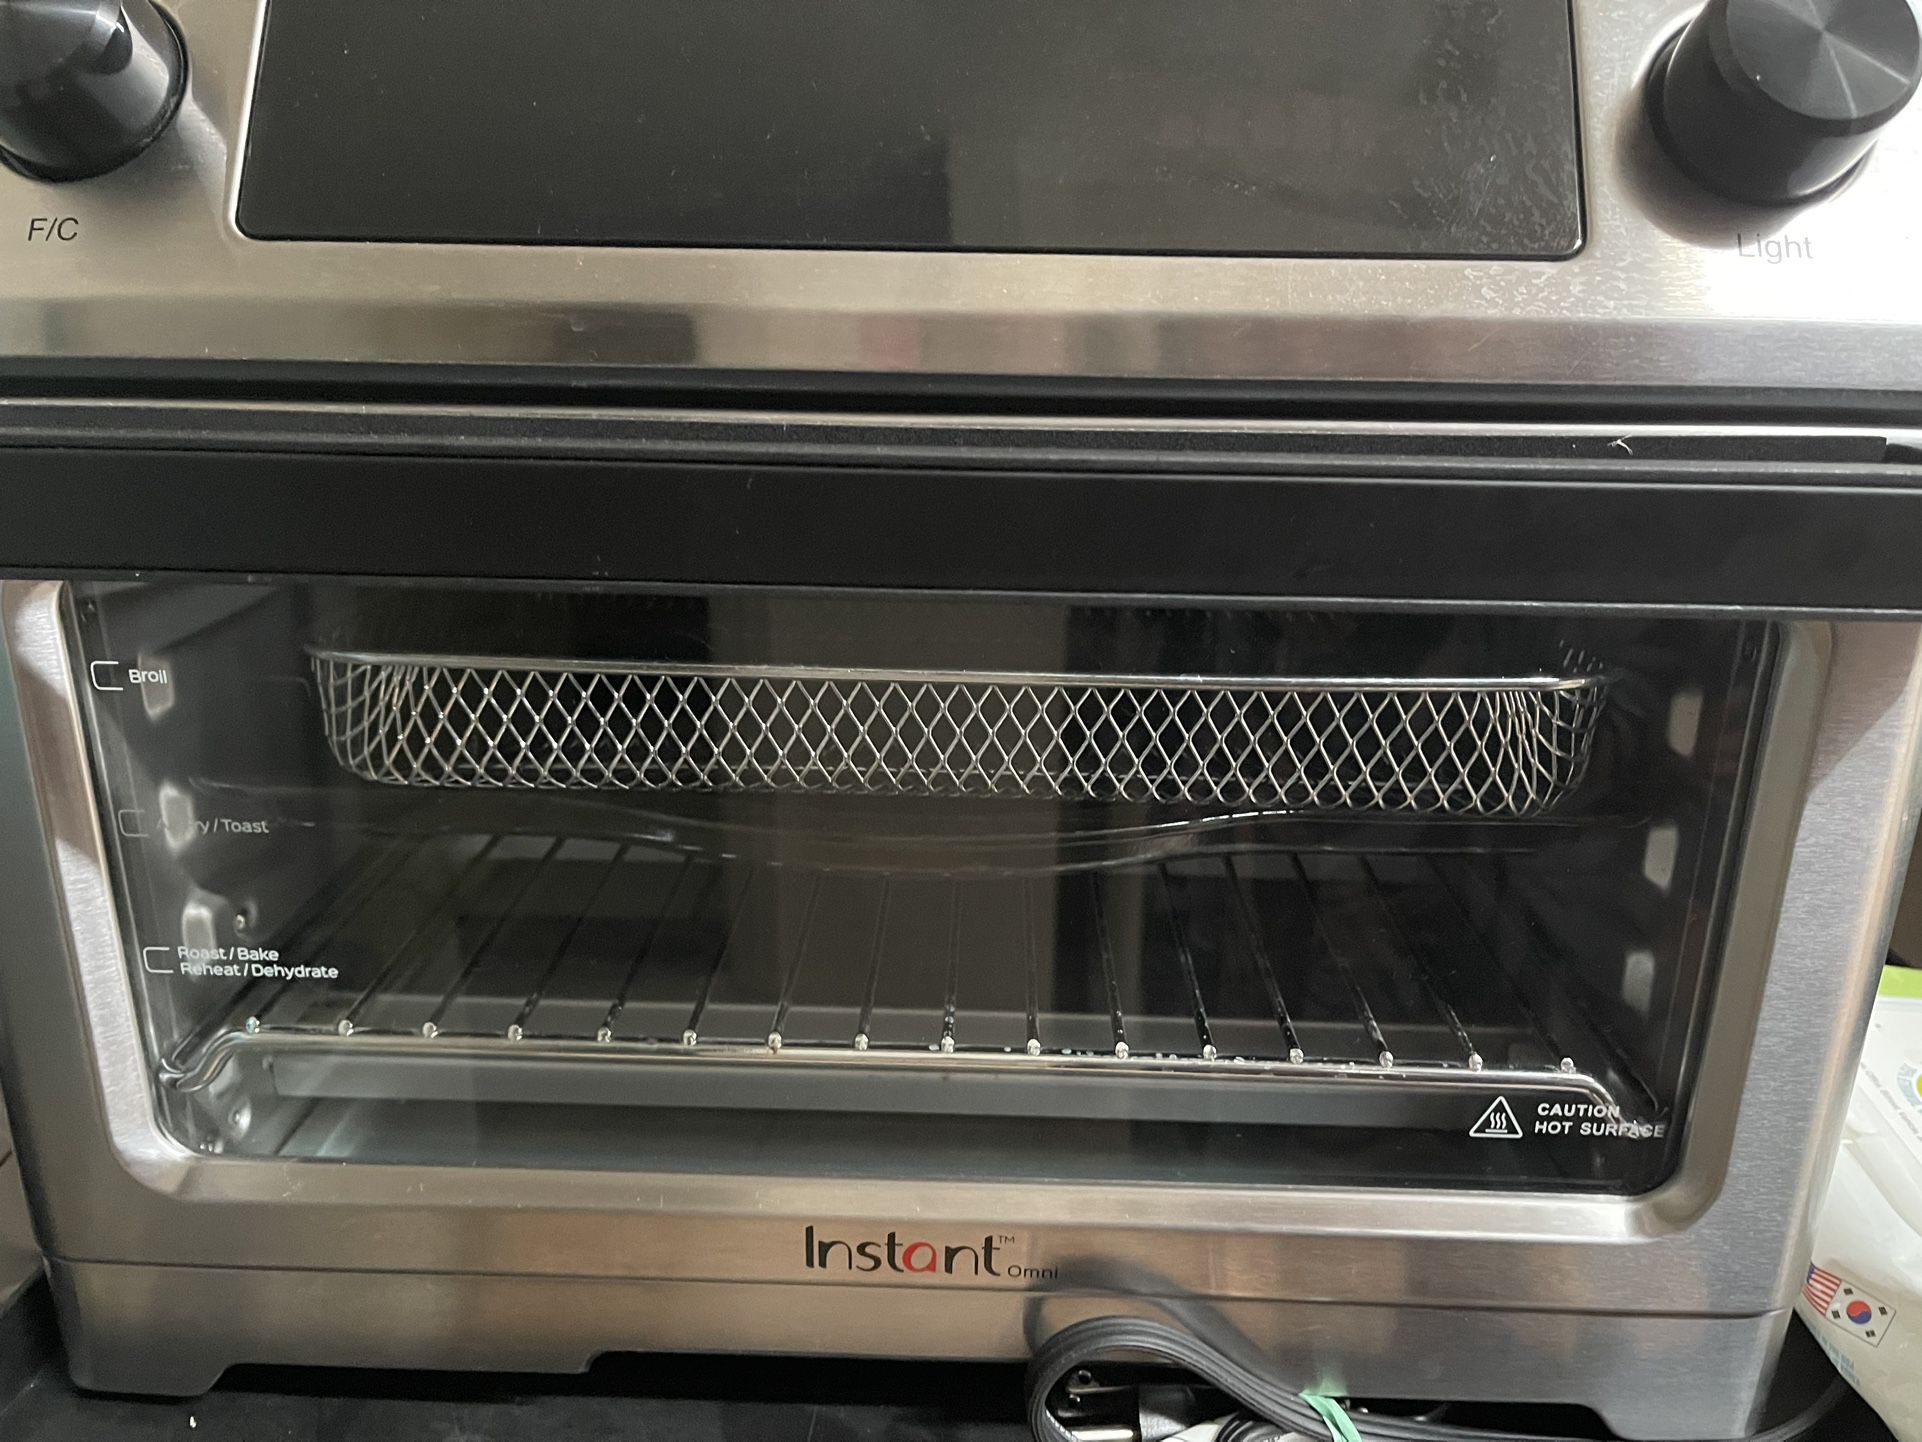 Instant pot Omni plus  Toaster oven air fryer and much more.